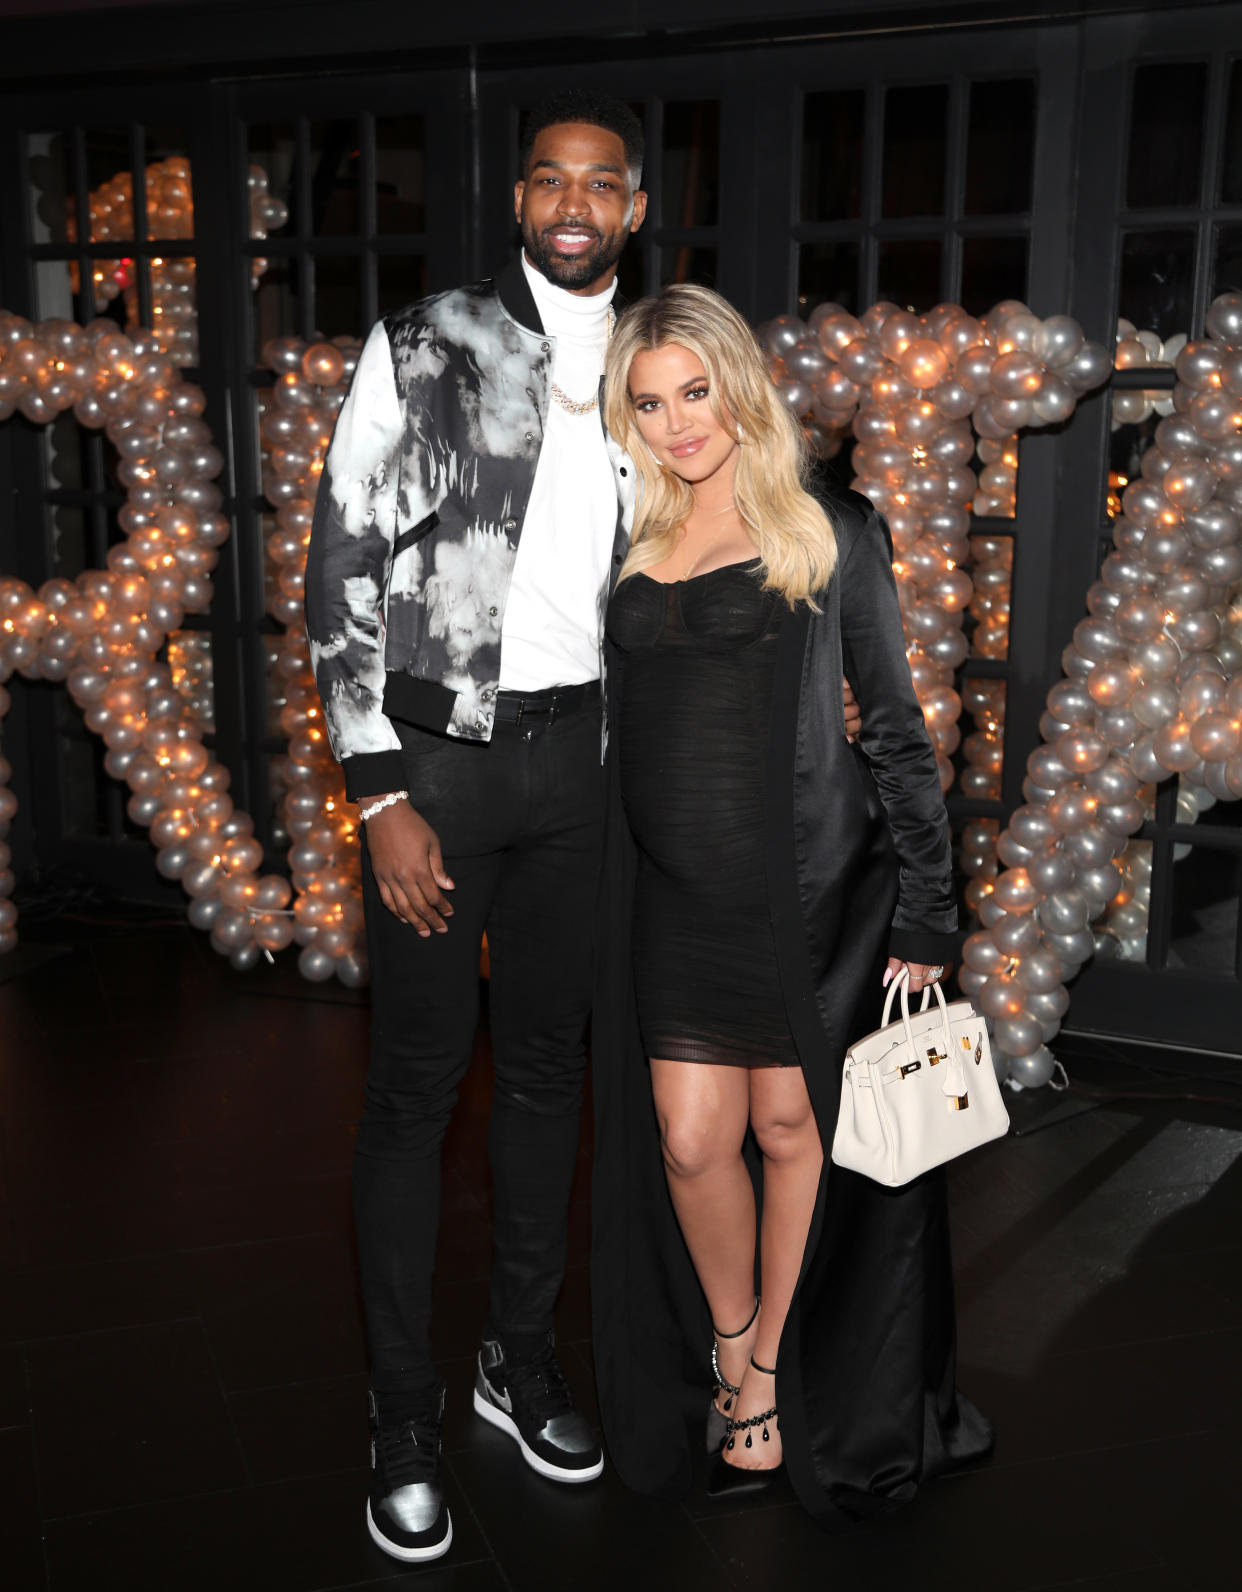 Khloe Kardashian says she’s “proud” of the co-parenting place she’s in with ex-boyfriend Tristan Thompson. (Photo: Jerritt Clark/Getty Images for Remy Martin)